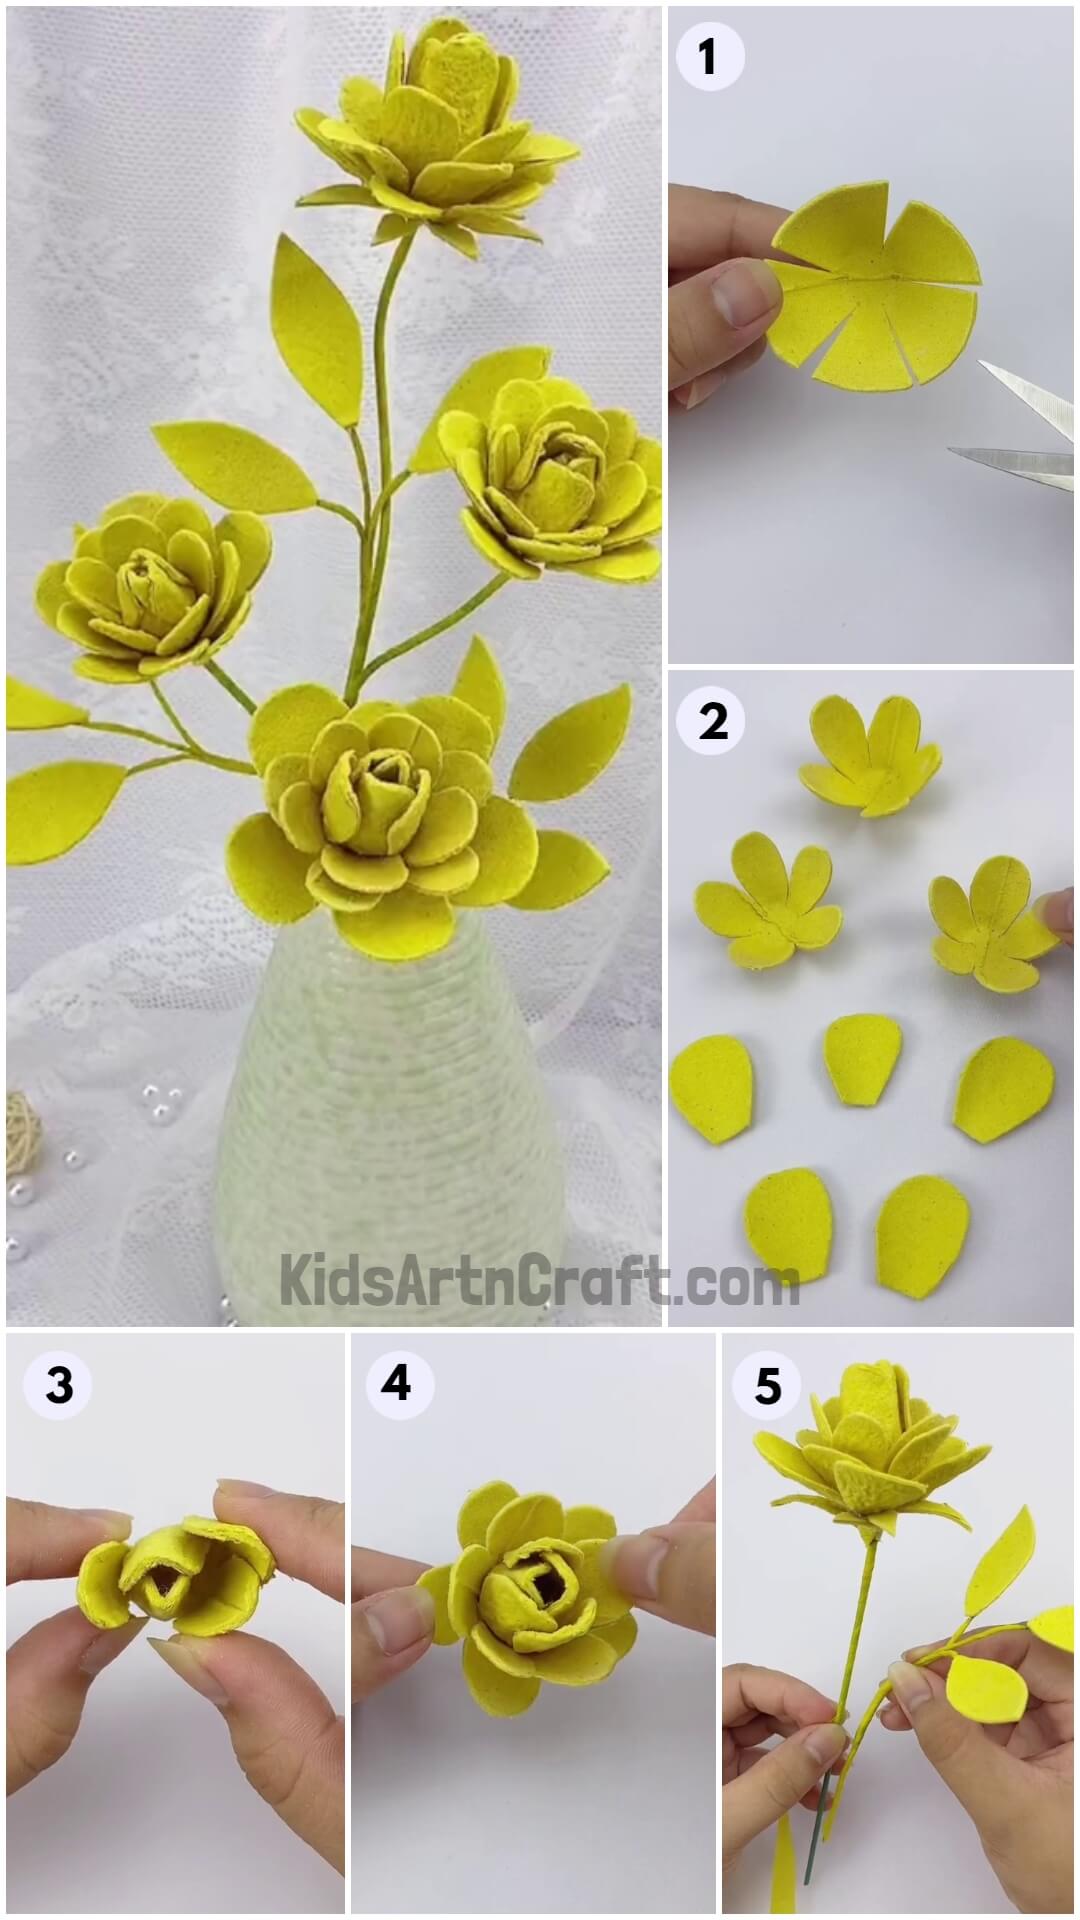 Pretty Roses Craft From The Egg Holder Tutorial For Kids